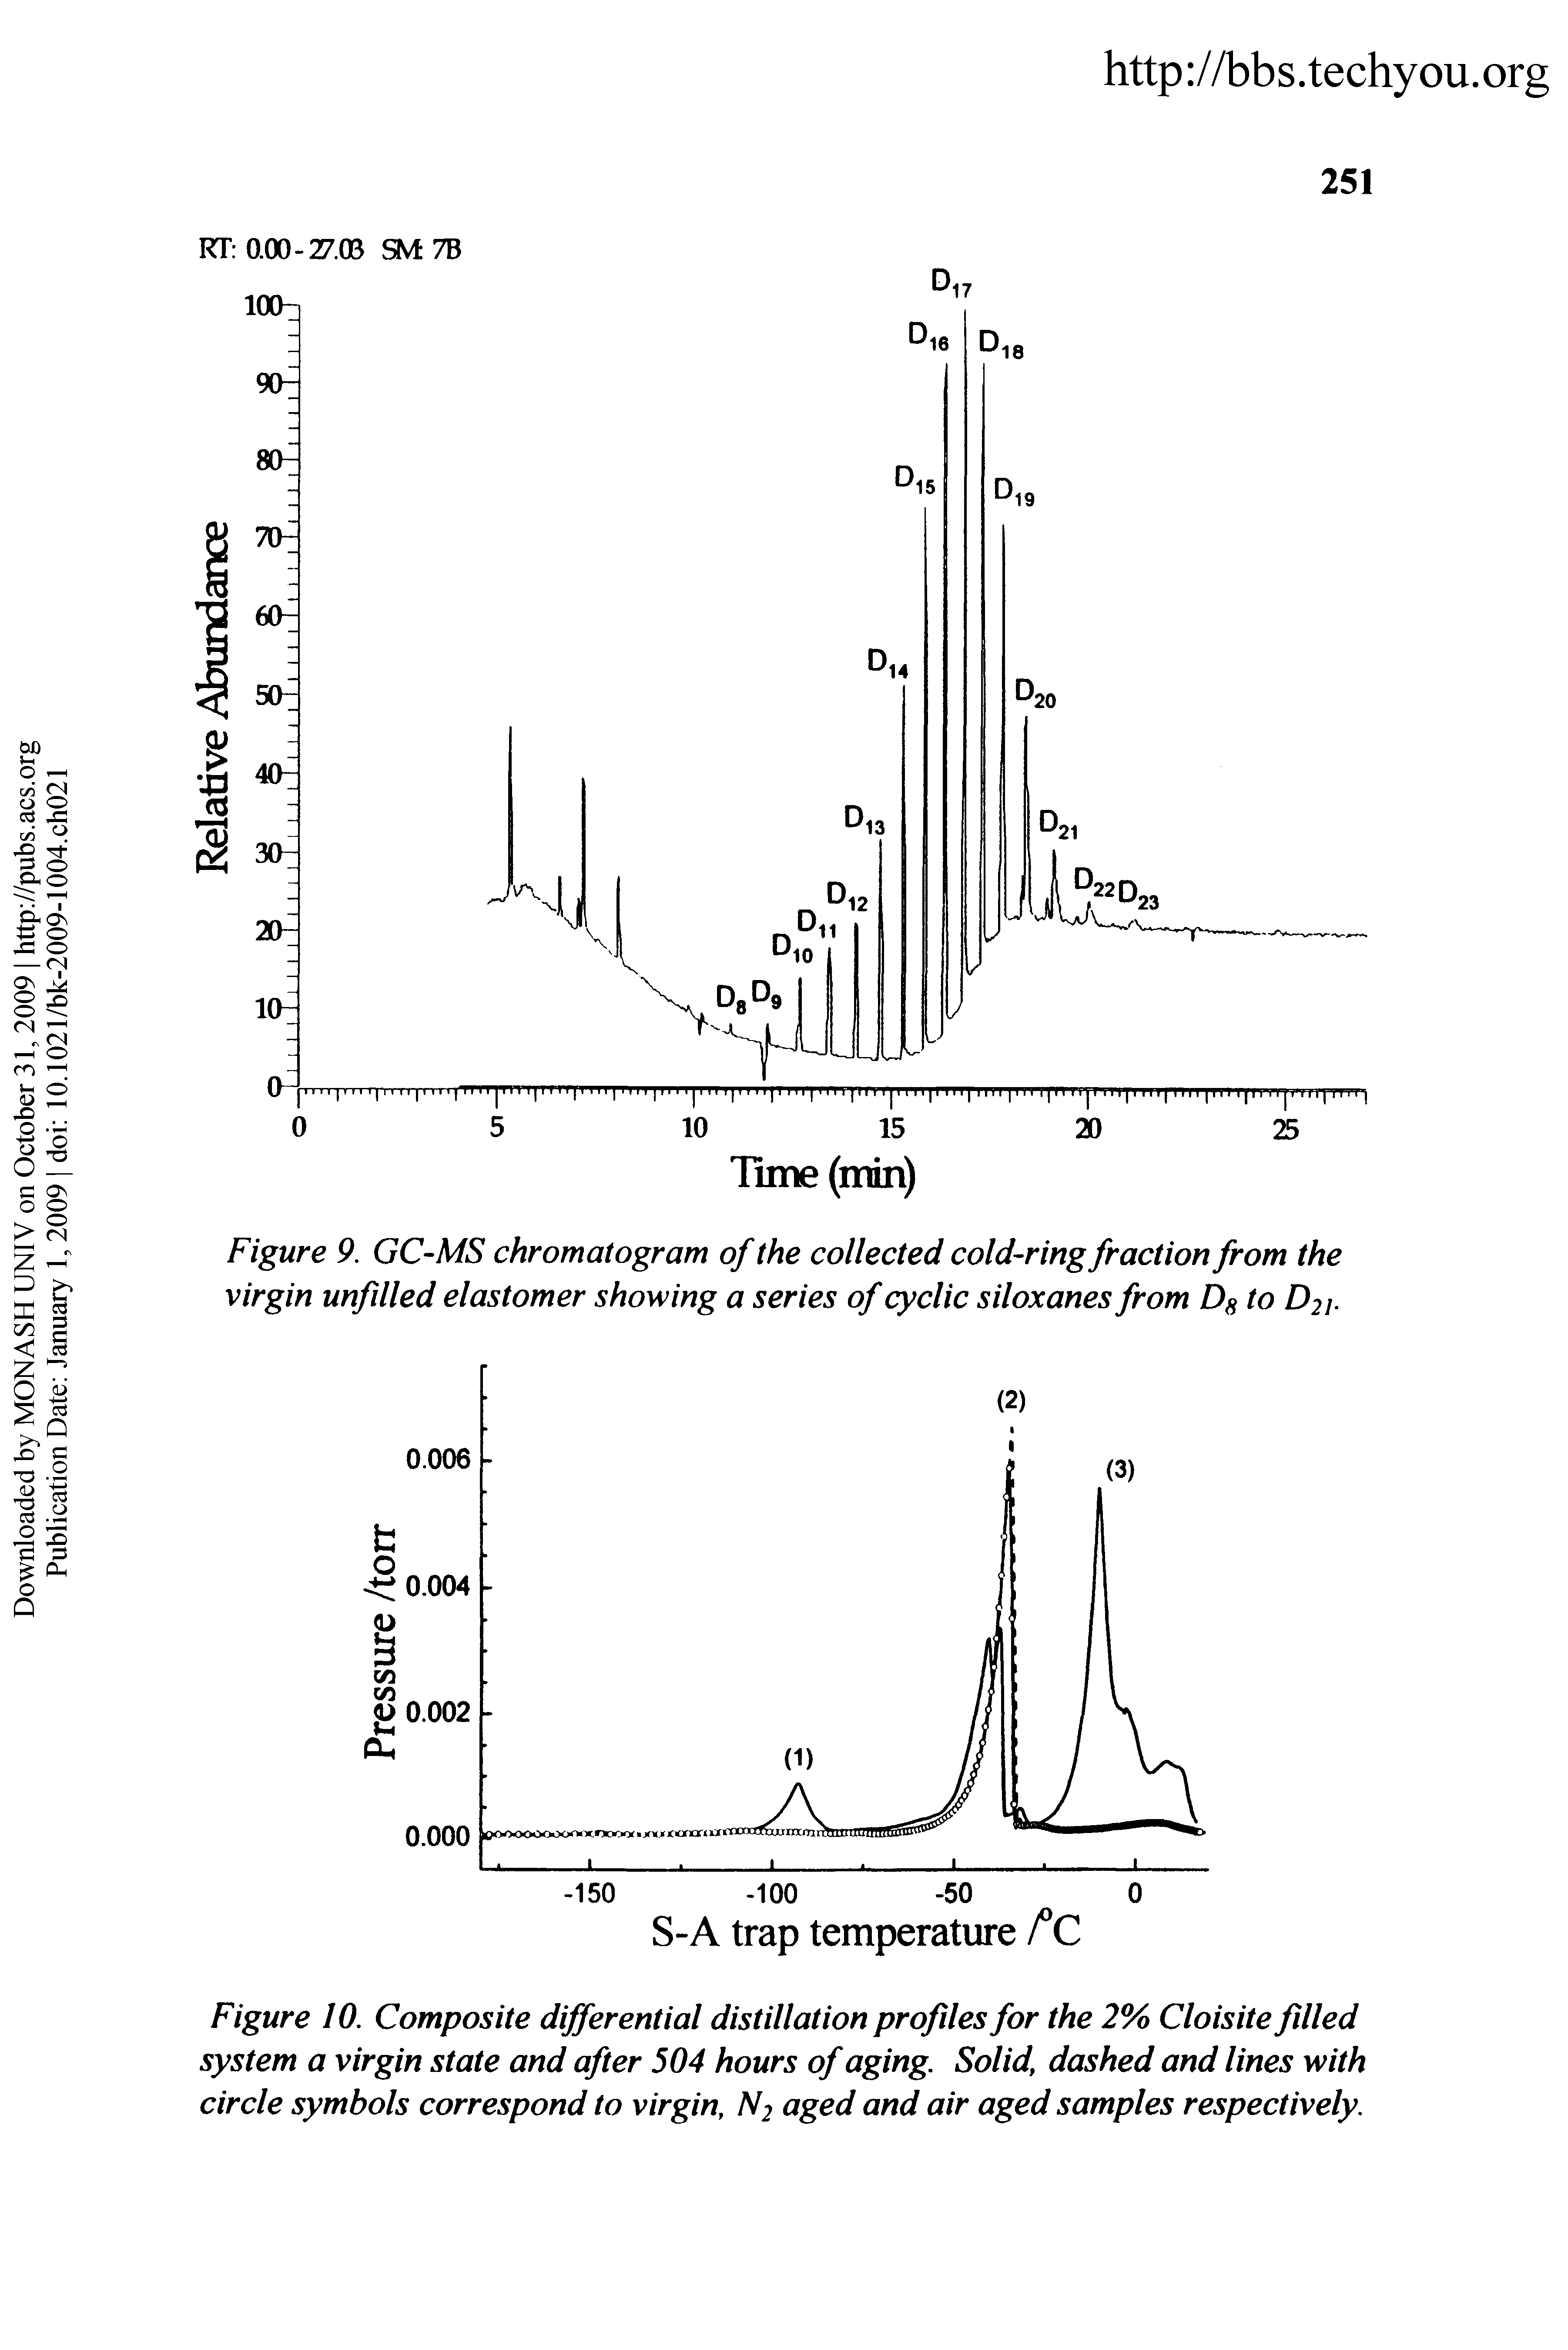 Figure 10. Composite differential distillation profiles for the 2% Cloisite filled system a virgin state and after 504 hours of aging. Solid, dashed and lines with circle symbols correspond to virgin, N2 aged and air aged samples respectively.